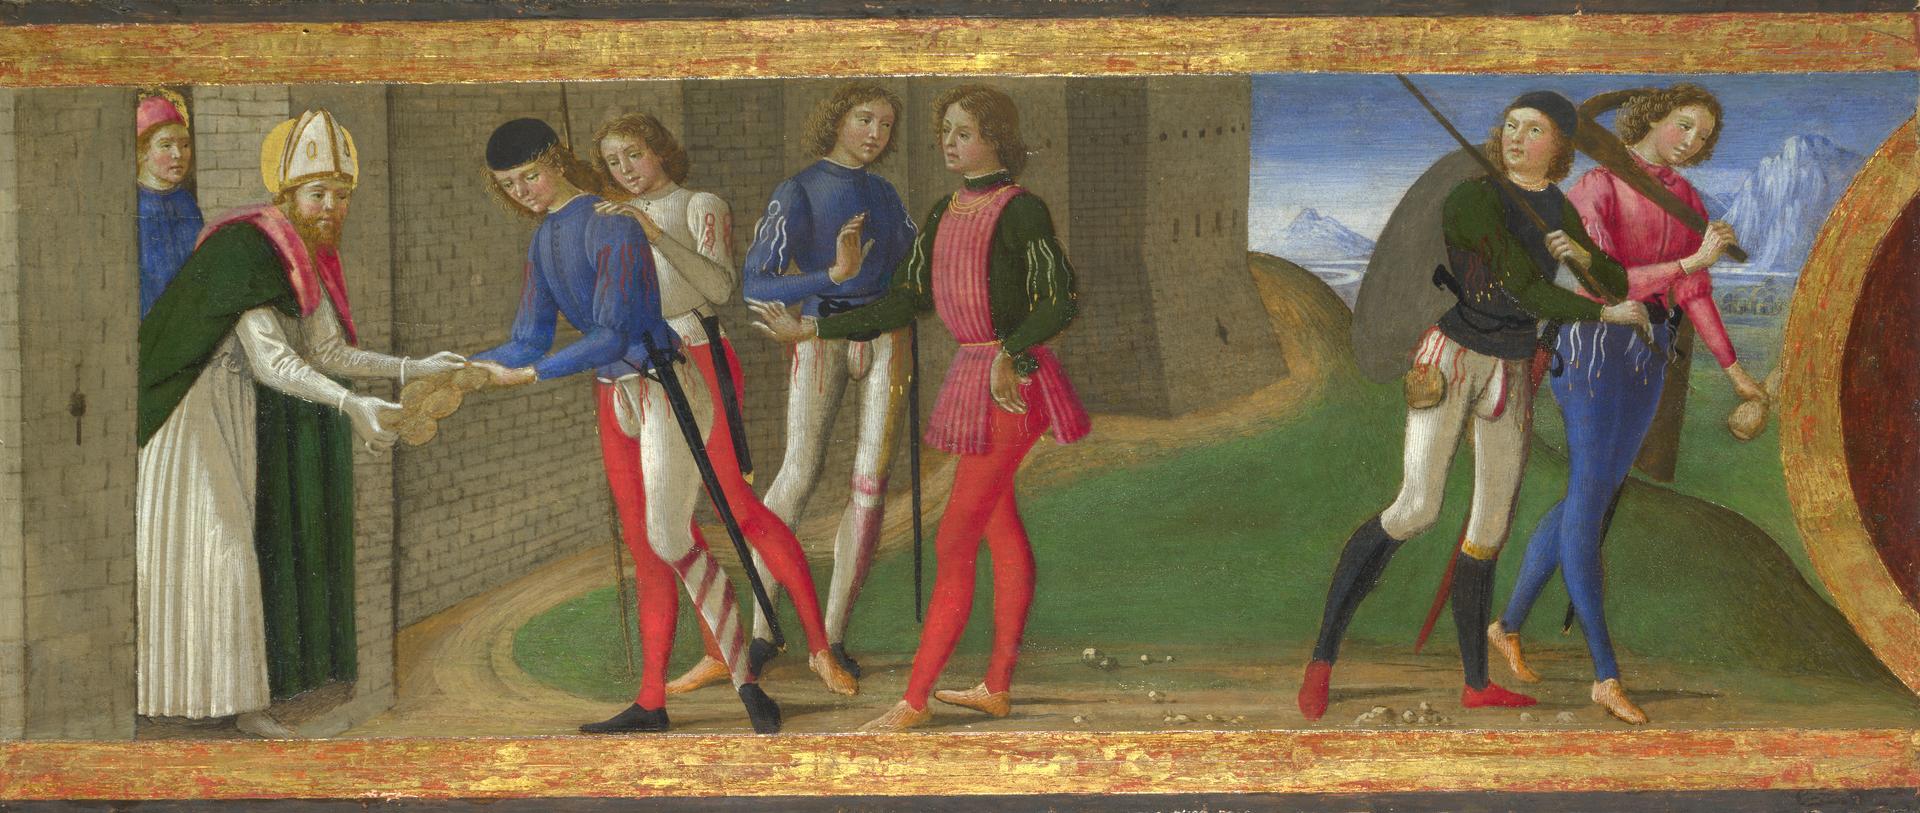 A Legend of Saints Justus and Clement of Volterra by Domenico Ghirlandaio